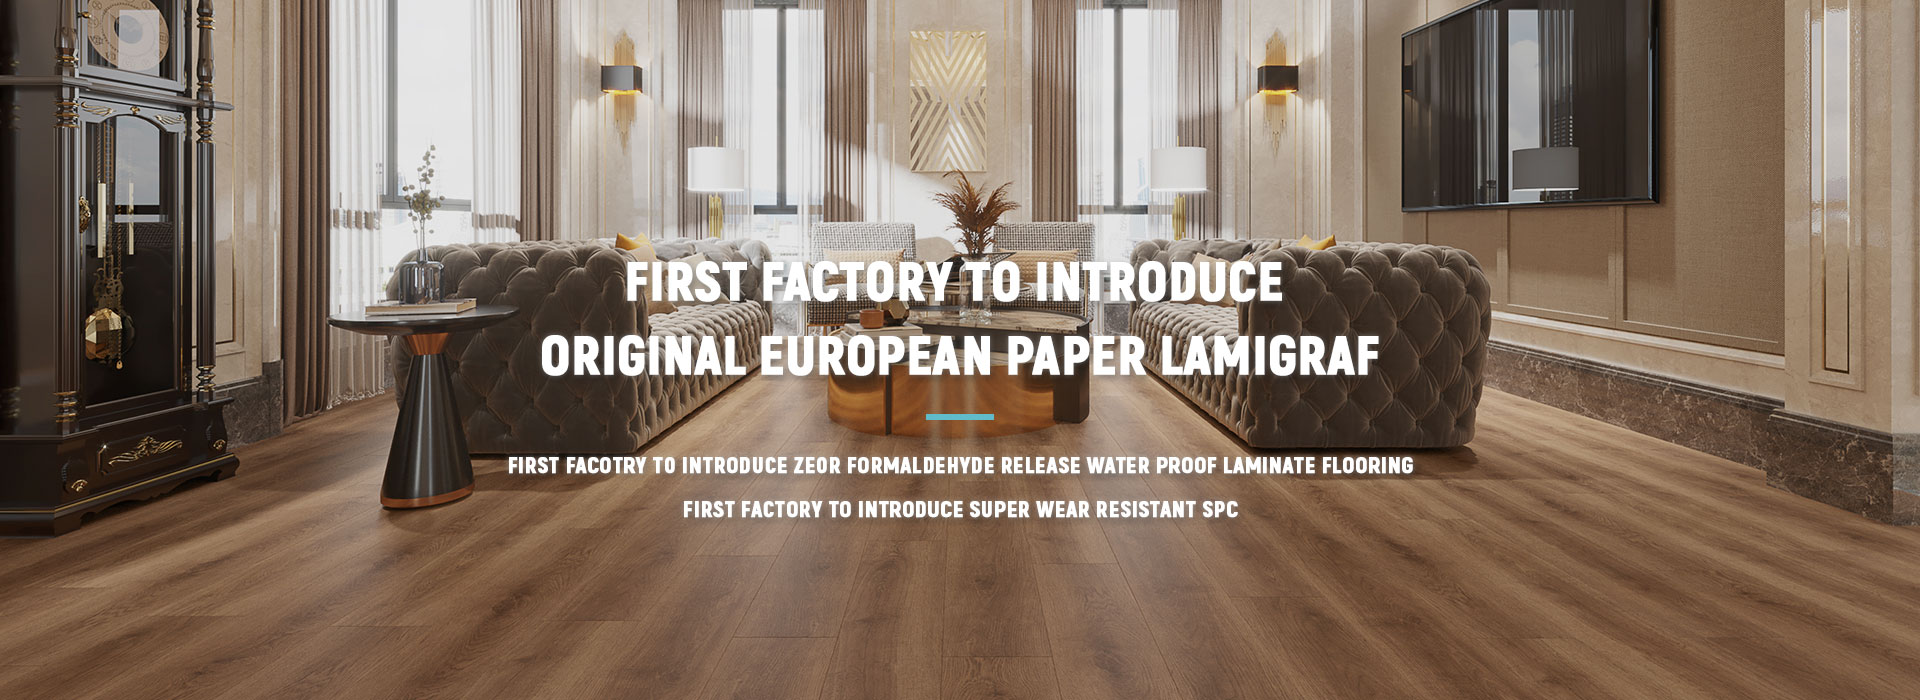 First factory to introduce  Original European paper Lamigraf